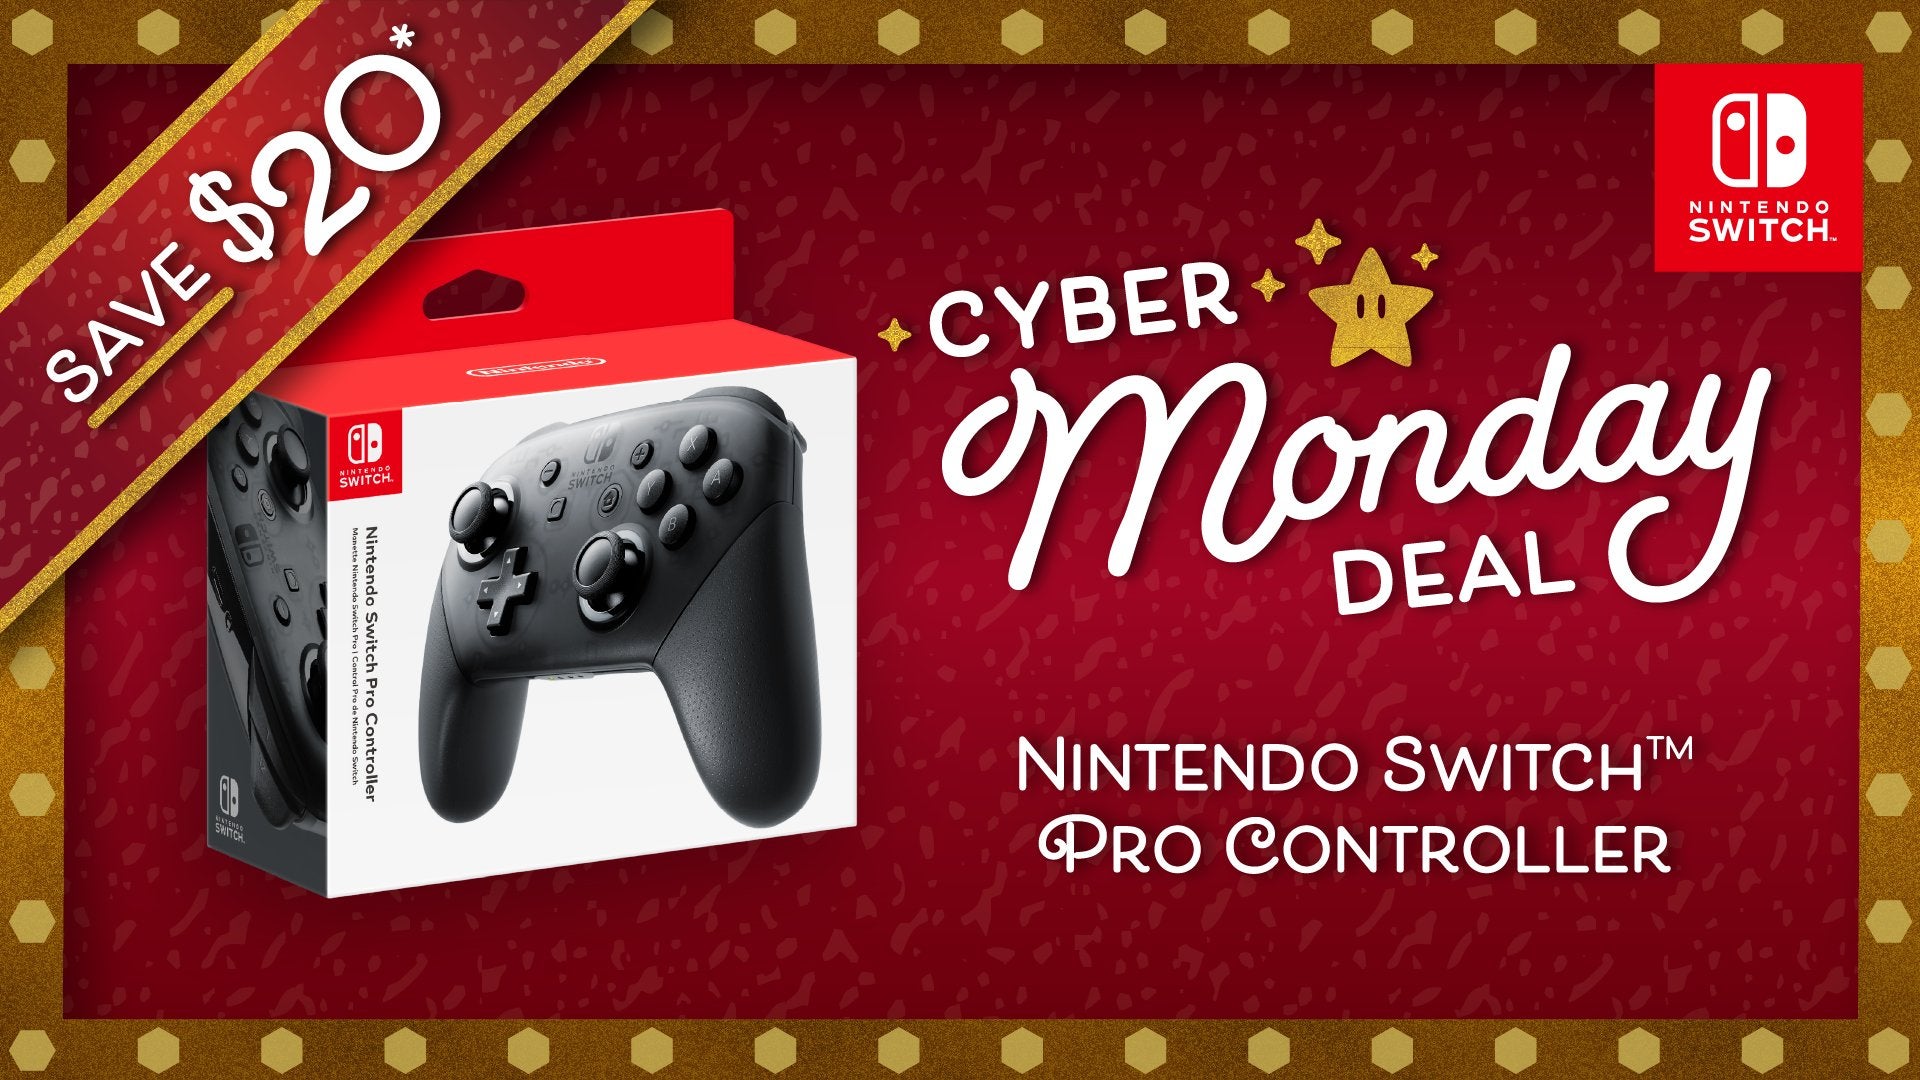 Nintendo has knocked off the Switch controller for Cyber Monday | Eurogamer.net